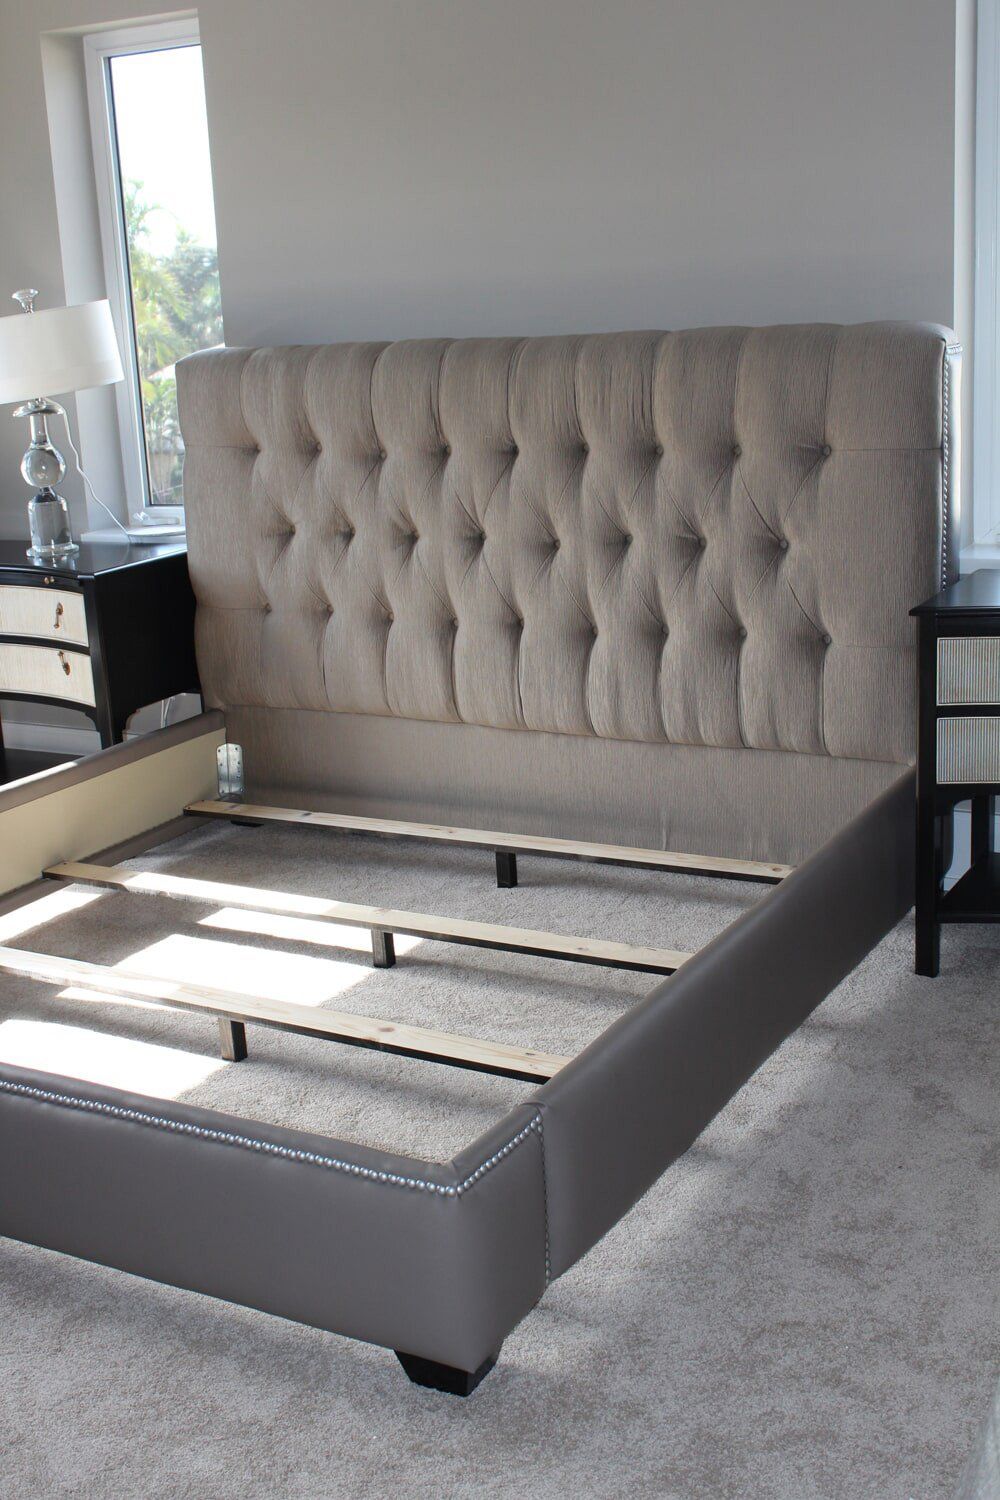 Bed Upholstery  — Wooden Bed frame in Fort Myers, FL